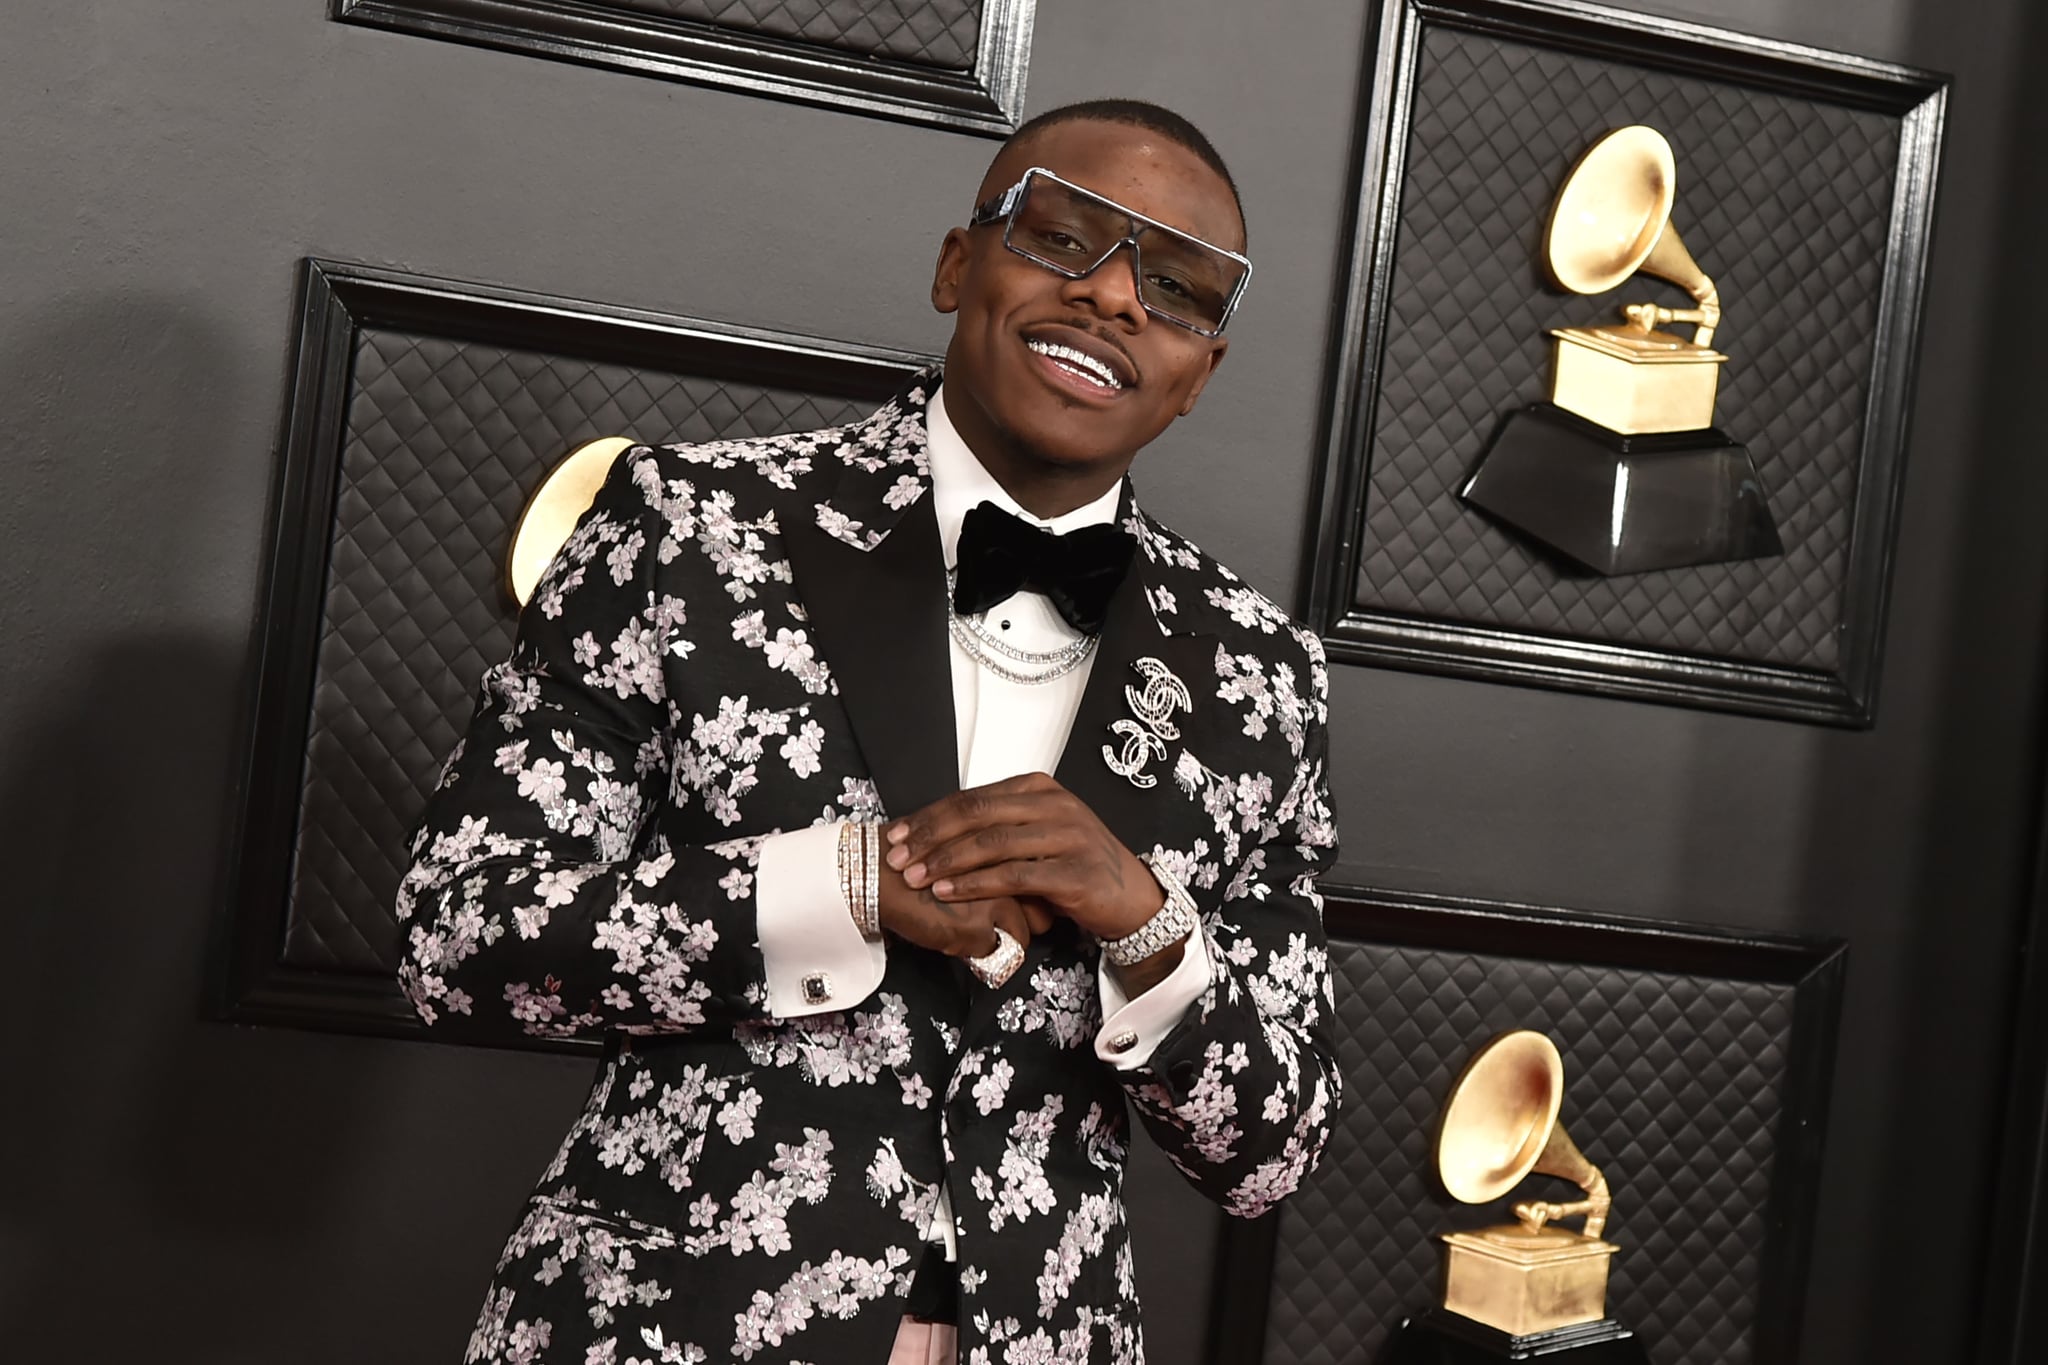 LOS ANGELES, CA - JANUARY 26: DaBaby attends the 62nd Annual Grammy Awards at Staples Centre on January 26, 2020 in Los Angeles, CA. (Photo by David Crotty/Patrick McMullan via Getty Images)